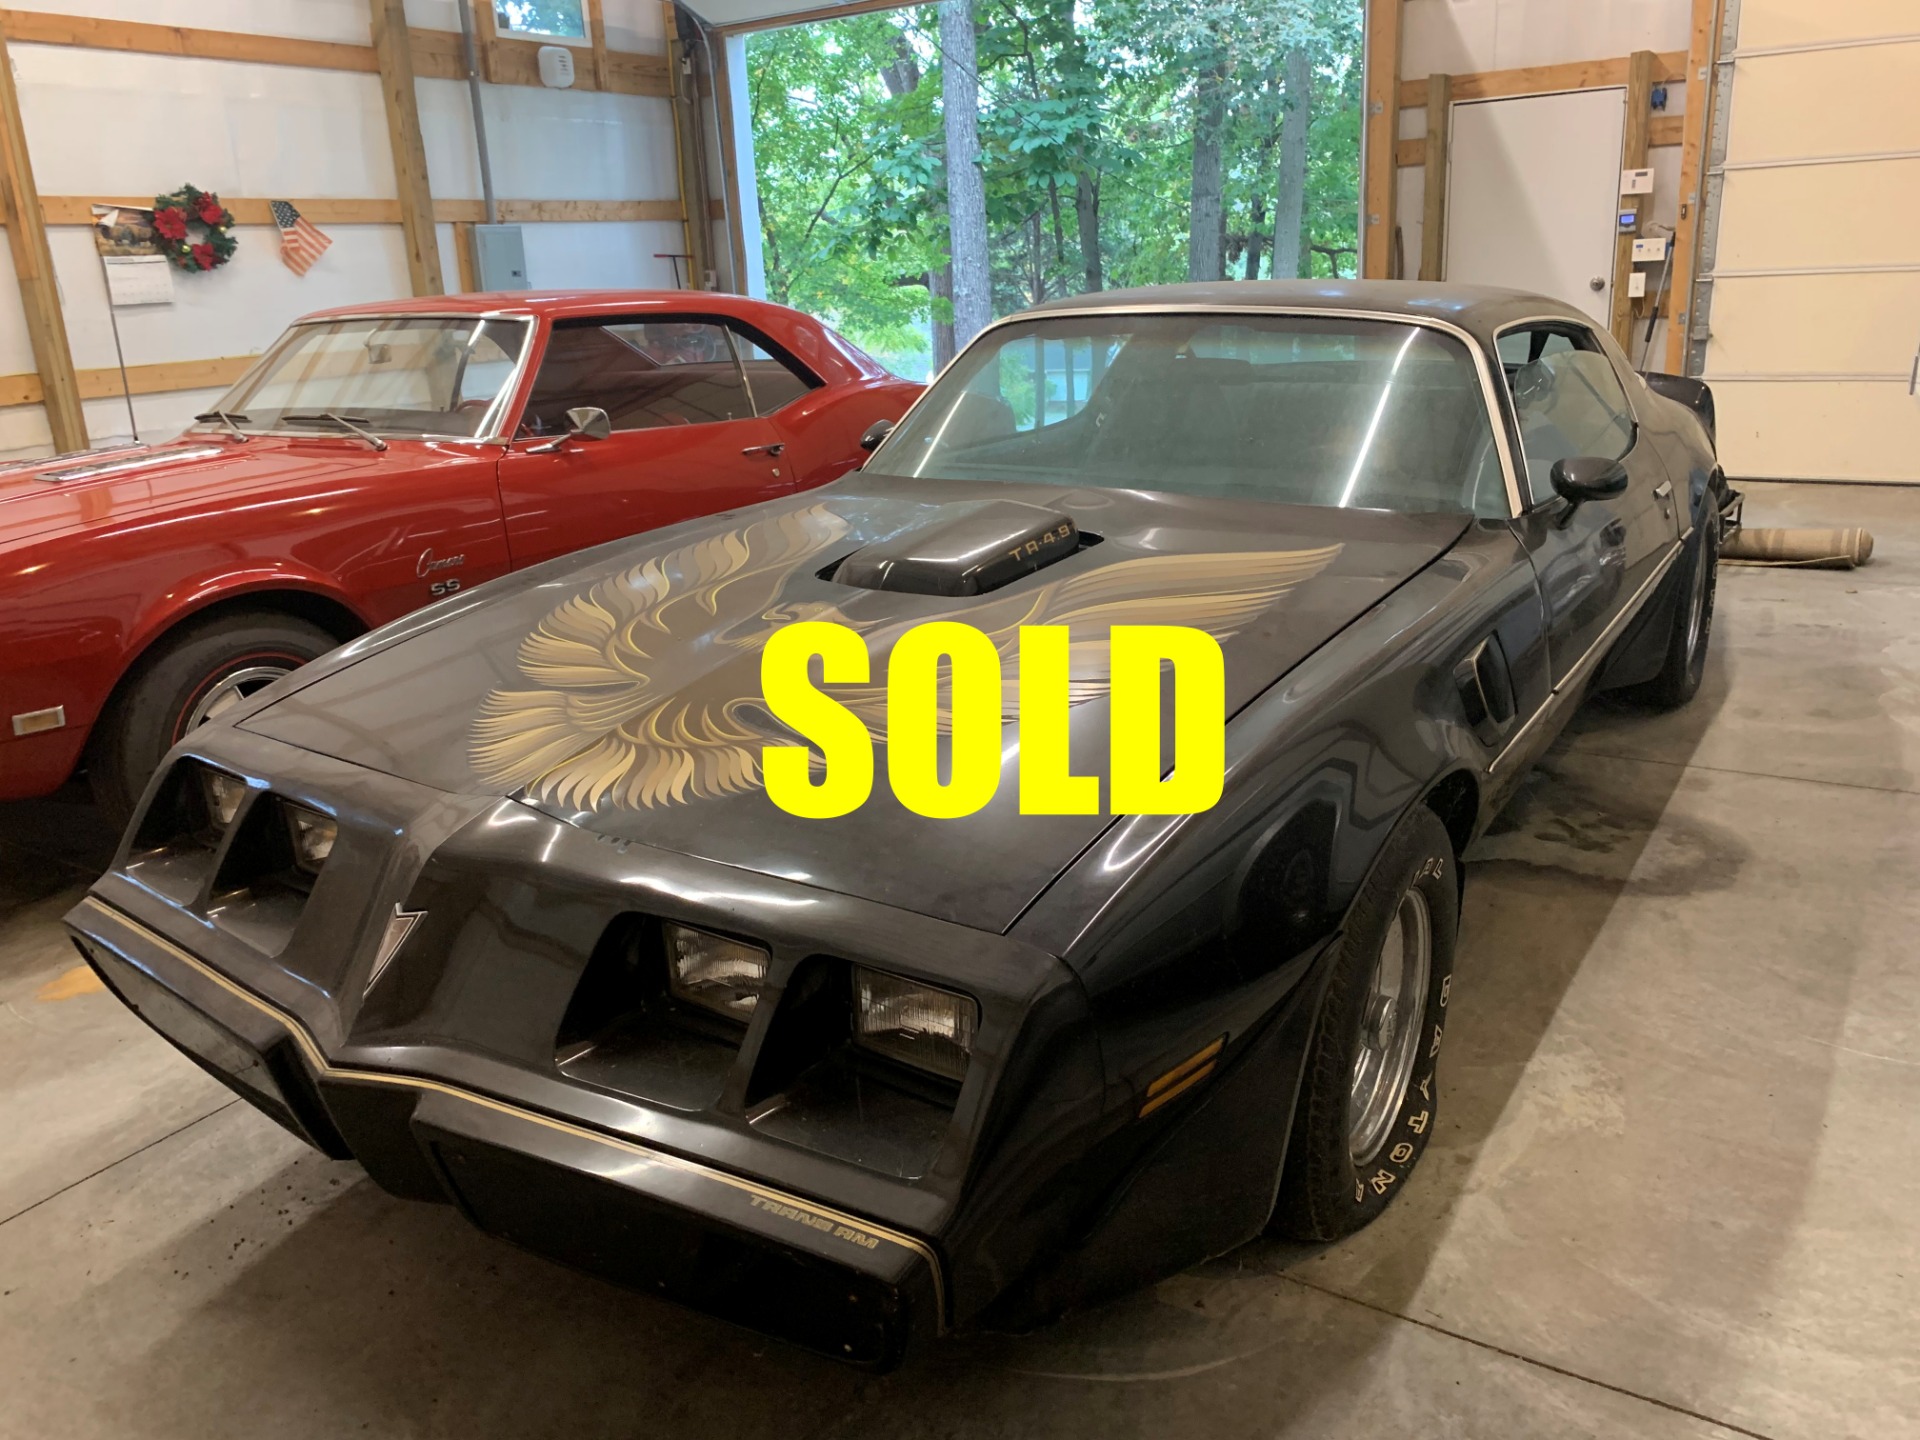 Used 1979 Pontiac Trans Am  202 , For Sale $16000, Call Us: (704) 996-3735